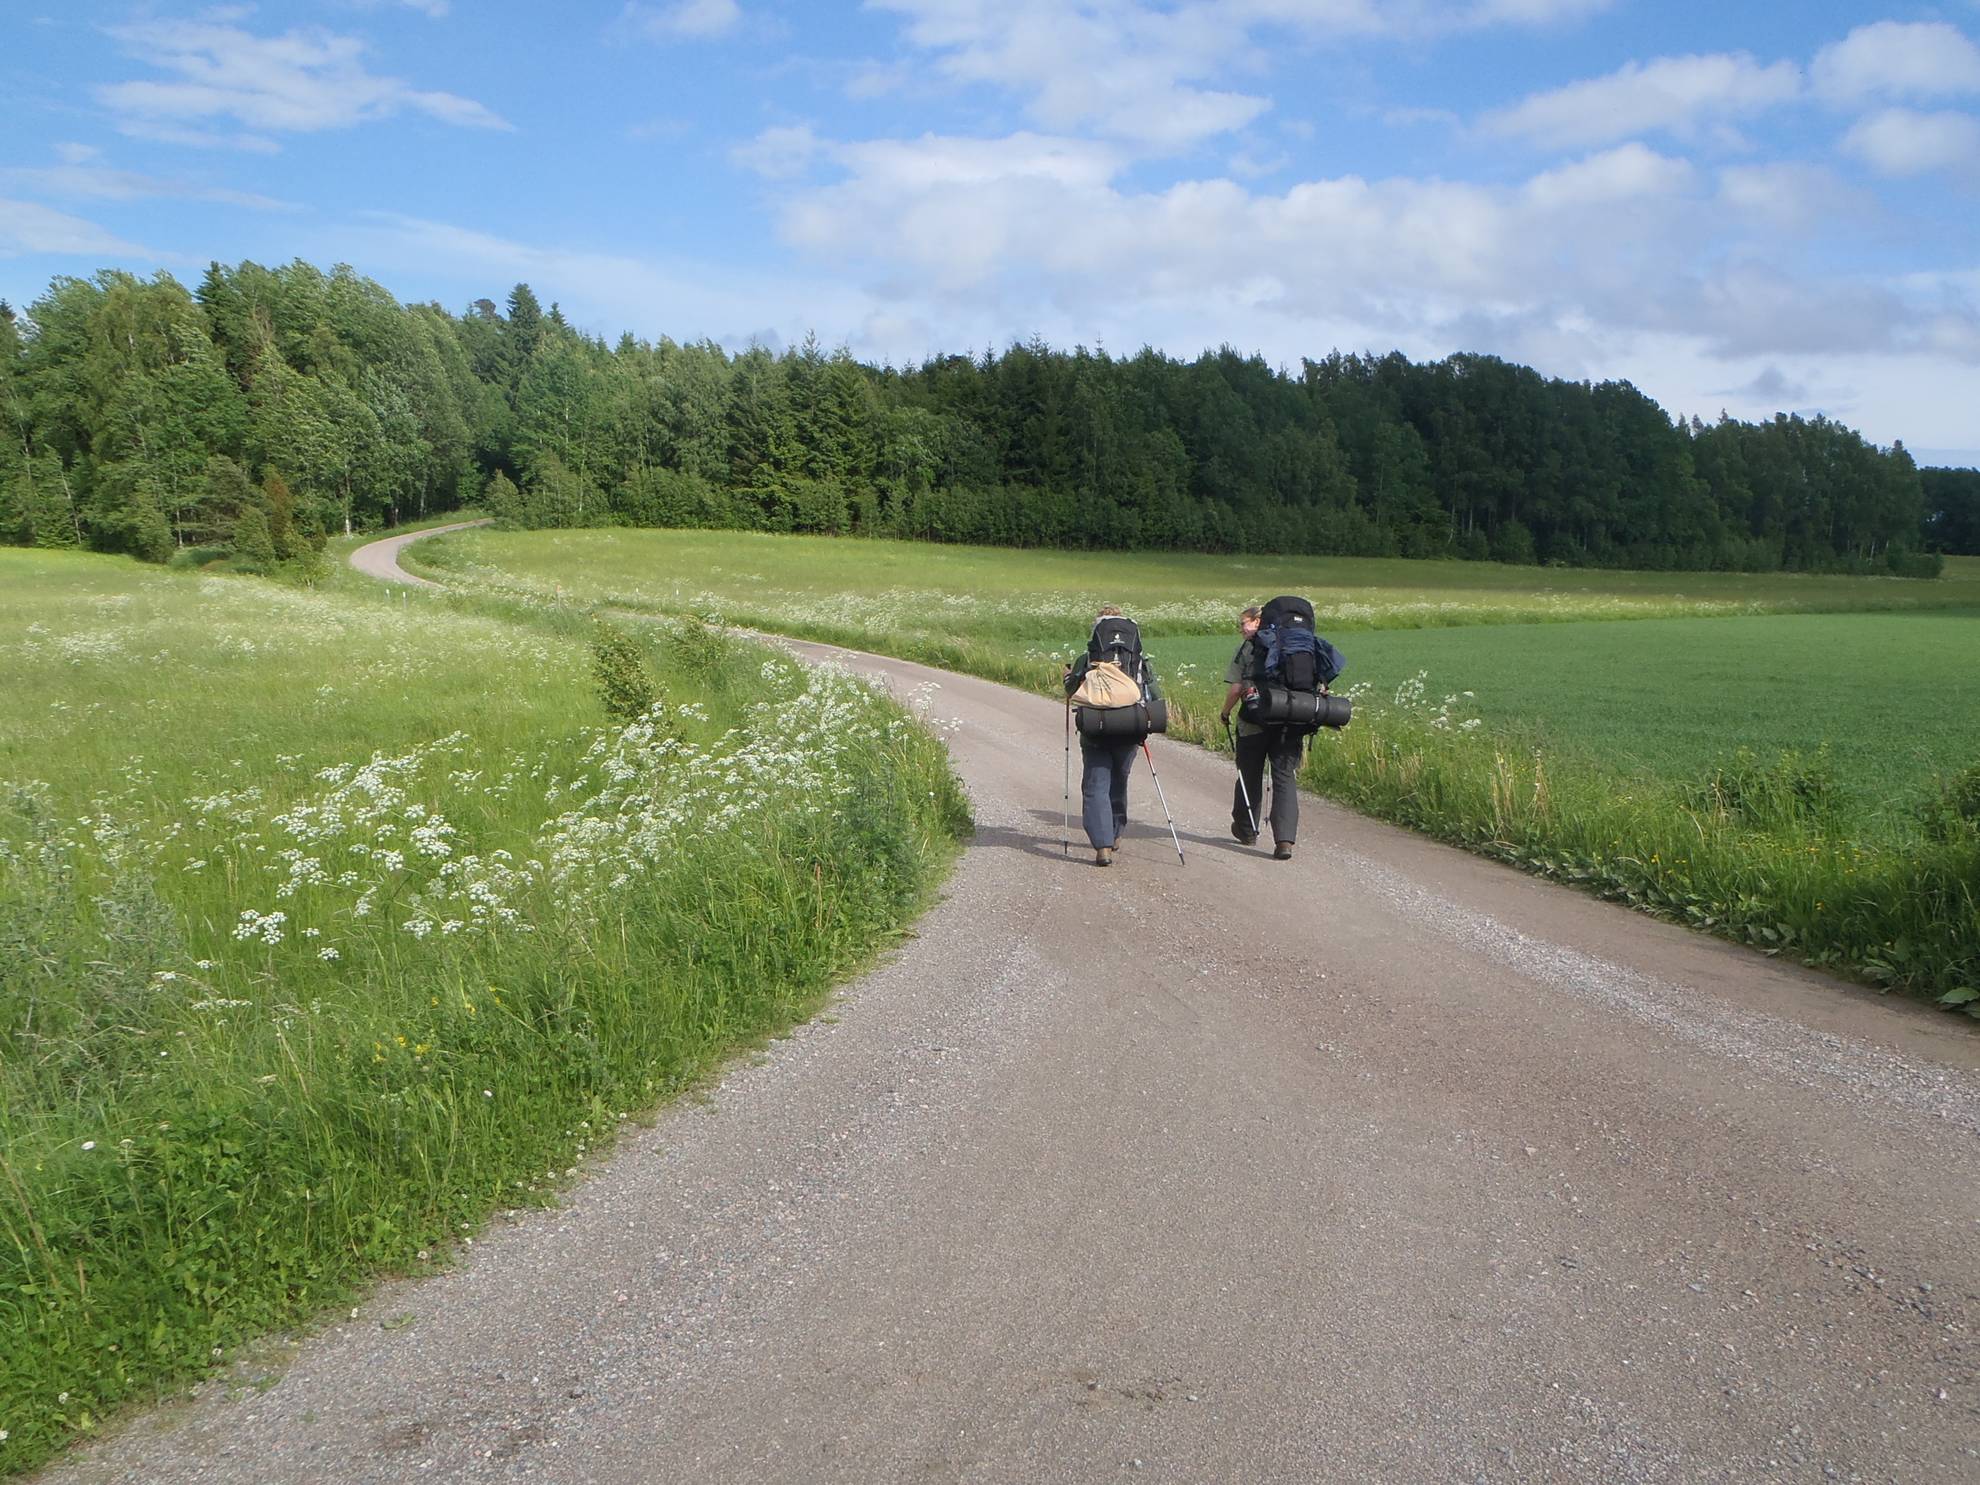 Two people with large backpacks walking on a gravel road surrounded by grass fields.